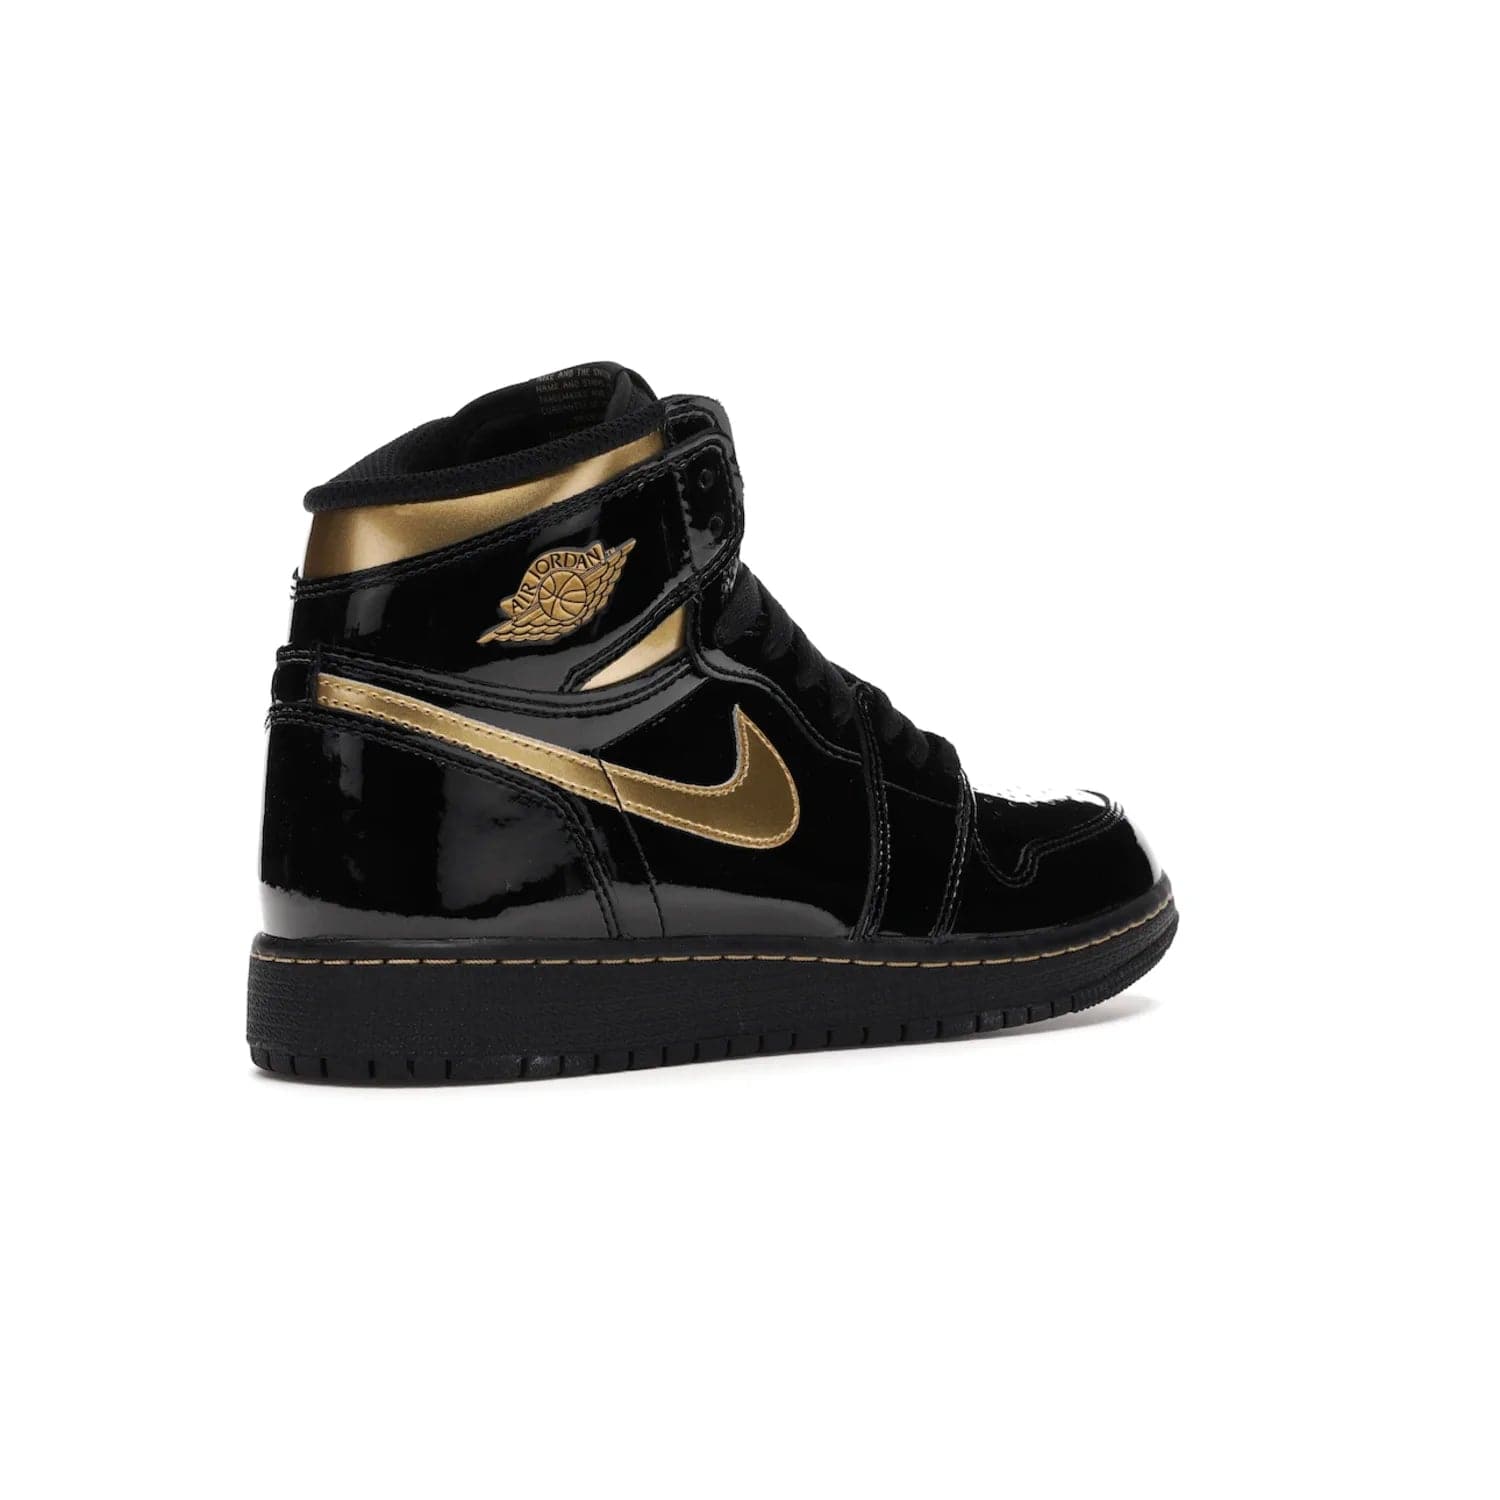 Jordan 1 Retro High Black Metallic Gold (2020) (GS) - Image 33 - Only at www.BallersClubKickz.com - Shop the Kids Air Jordan 1 Retro High in Black Metallic Gold for a stylish and comfortable sneaker kids can love. Featuring black and metallic gold patent leather uppers, metallic gold accents, and an Air sole unit for extra cushioning.